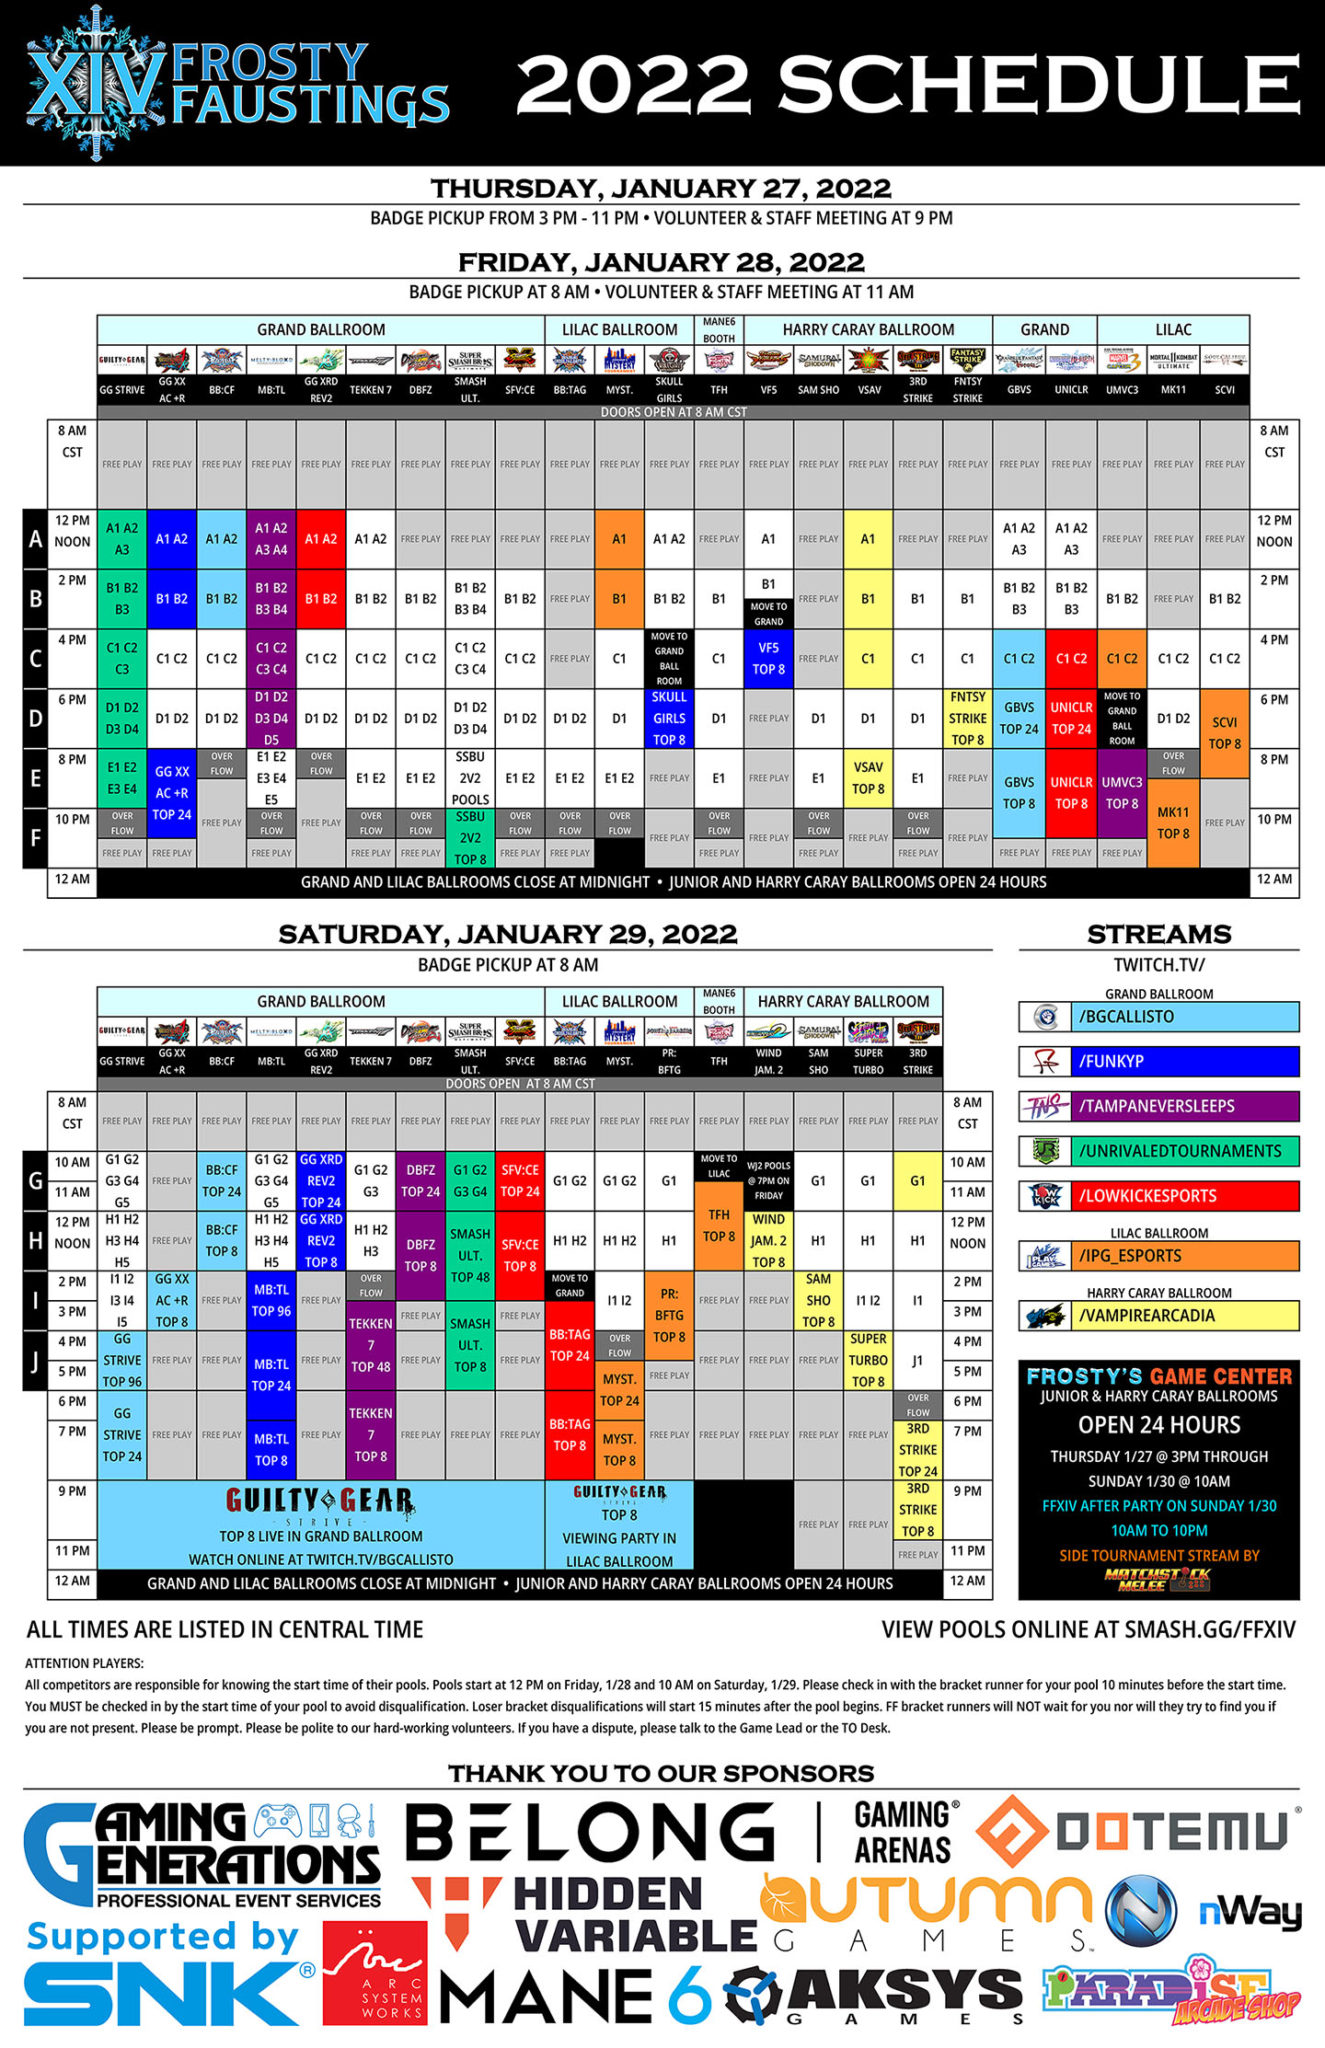 FFXIV SCHEDULE SMALL Frosty Faustings